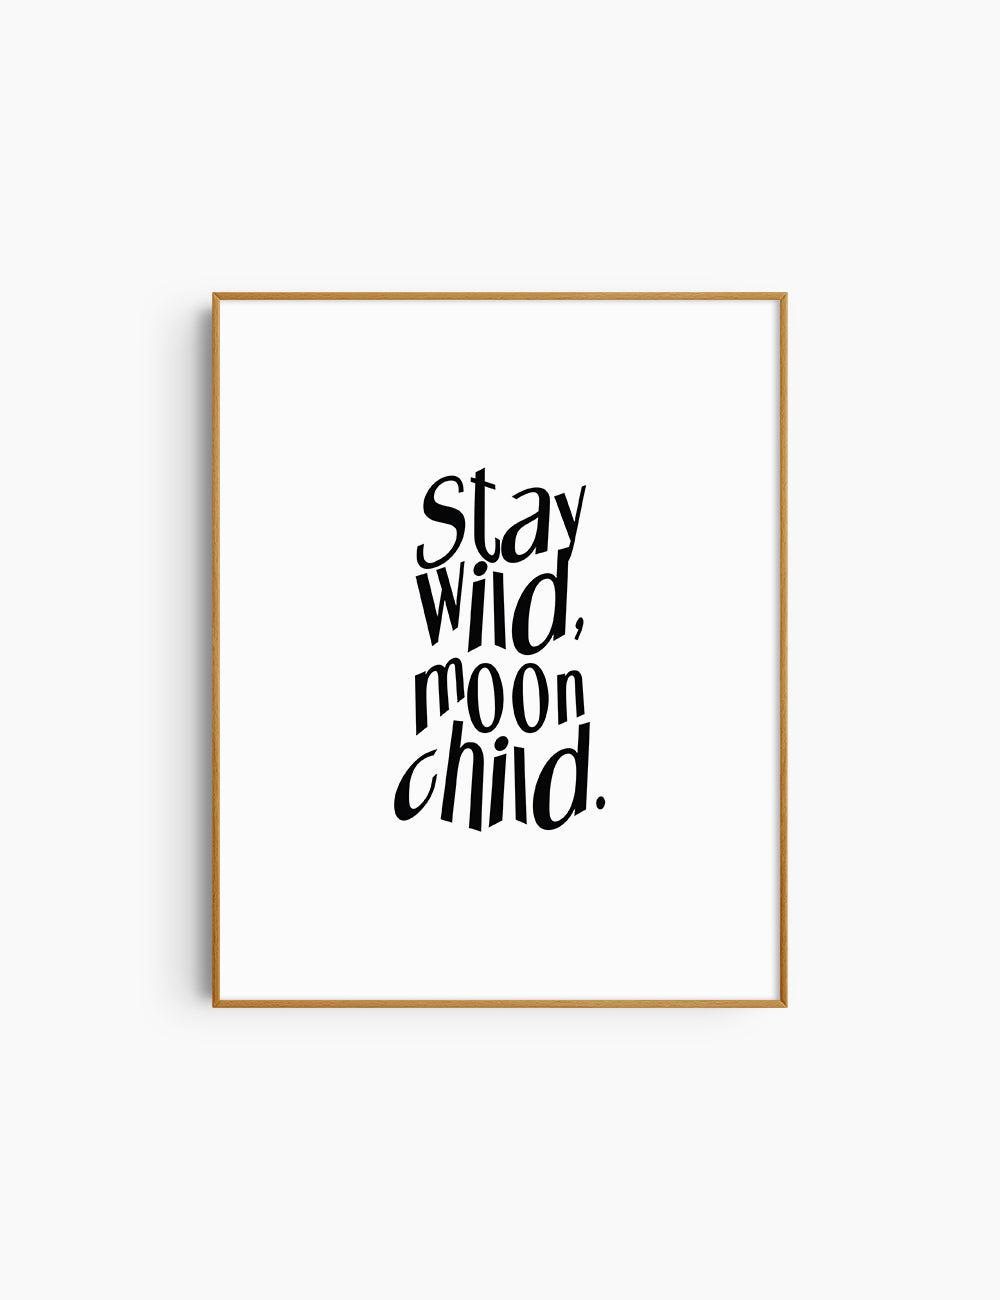 STAY WILD, MOON CHILD. Black and White. Printable Wall Art Quote.